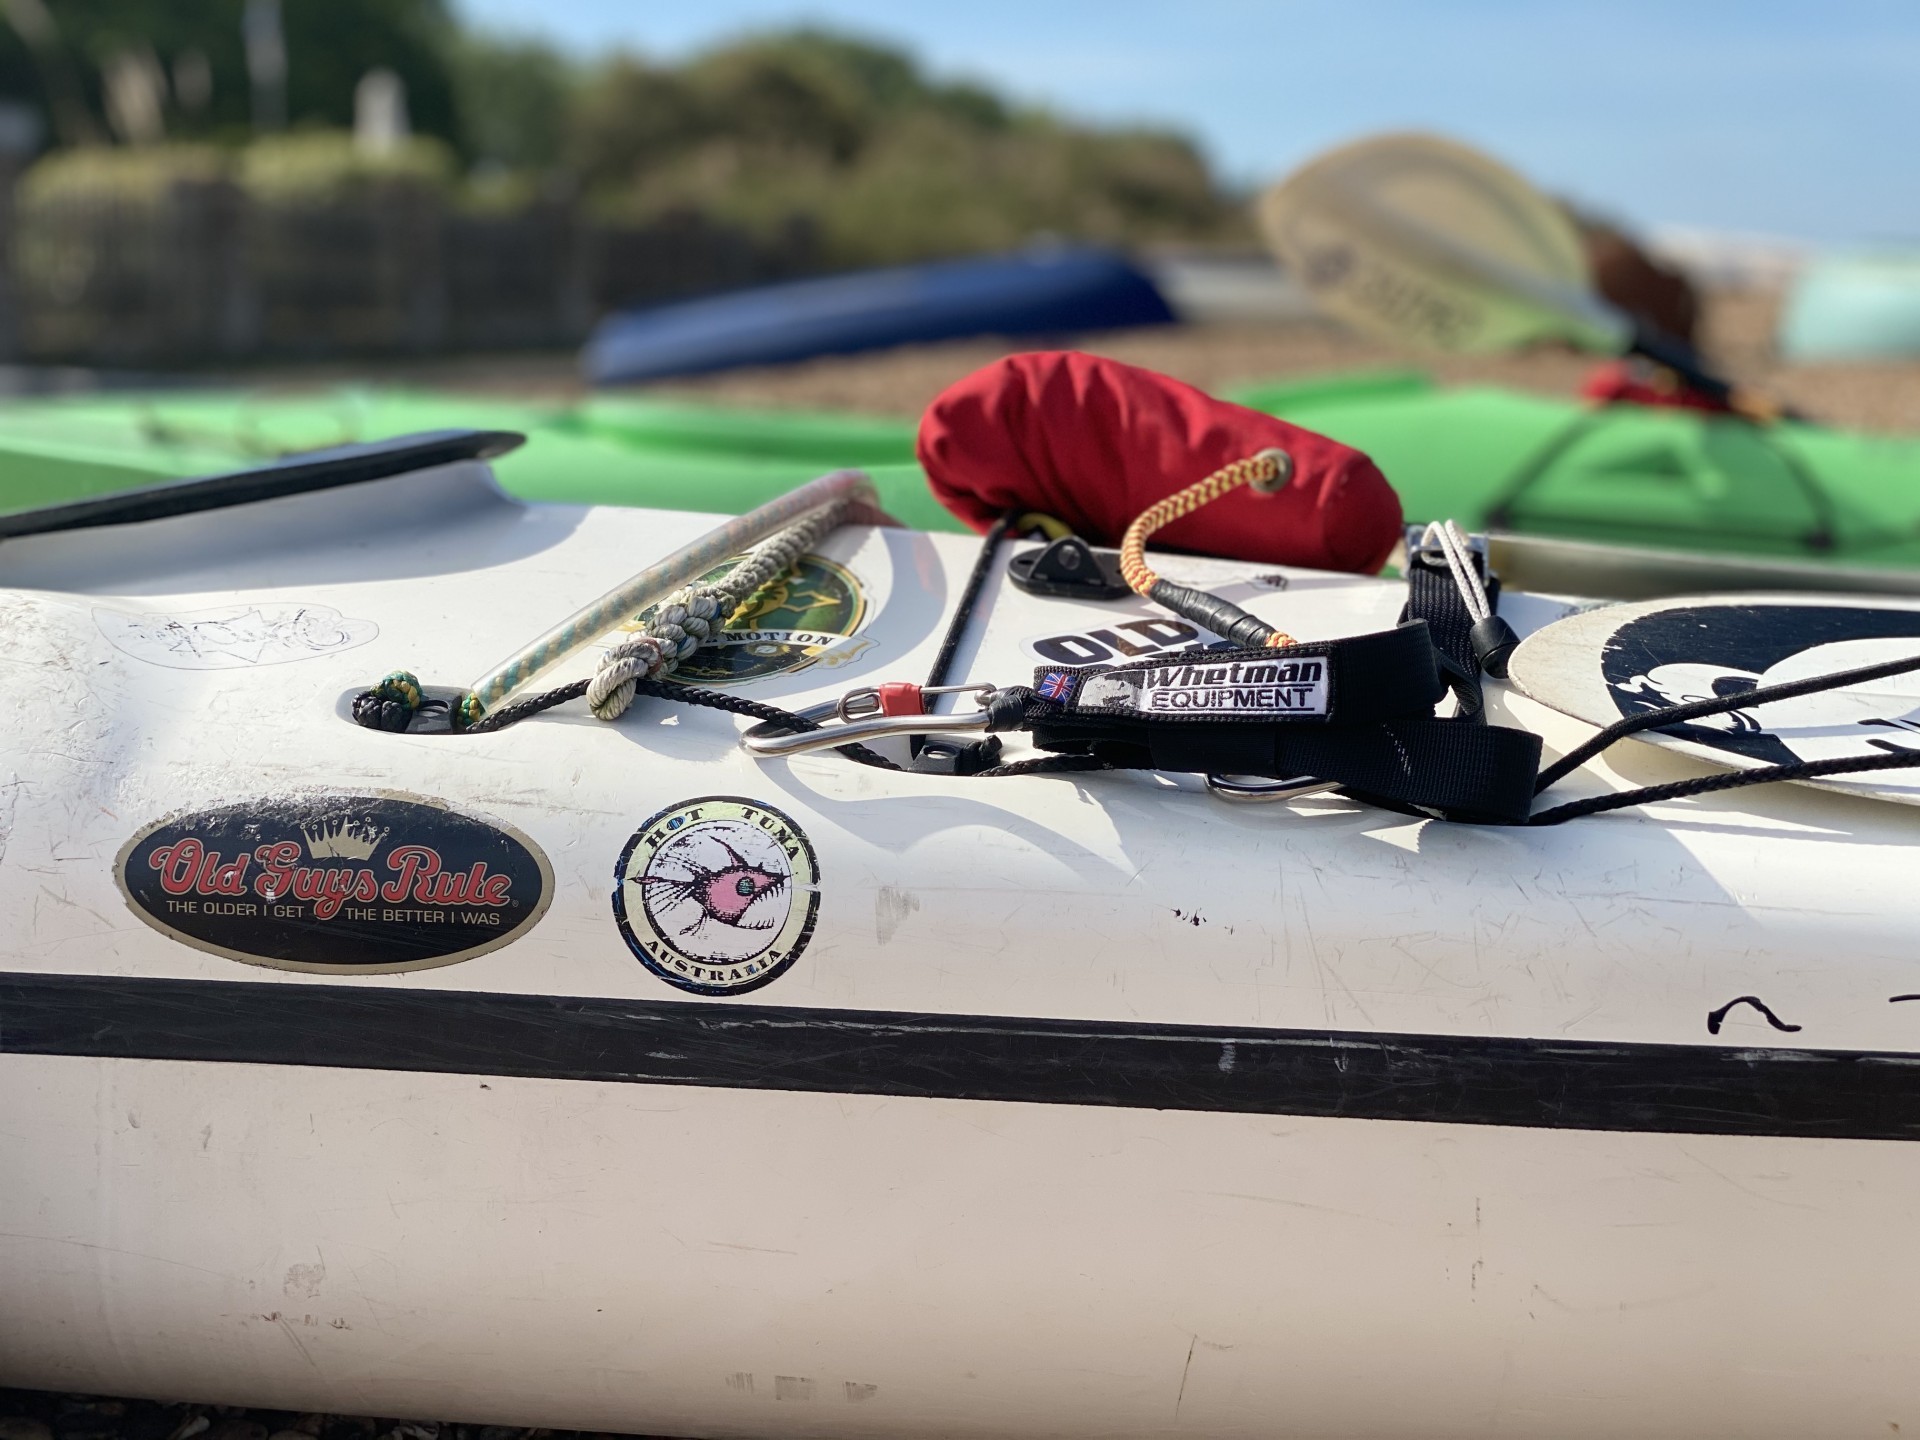 Safety equipment shown on the front deck of a sea kayak ready for a training course